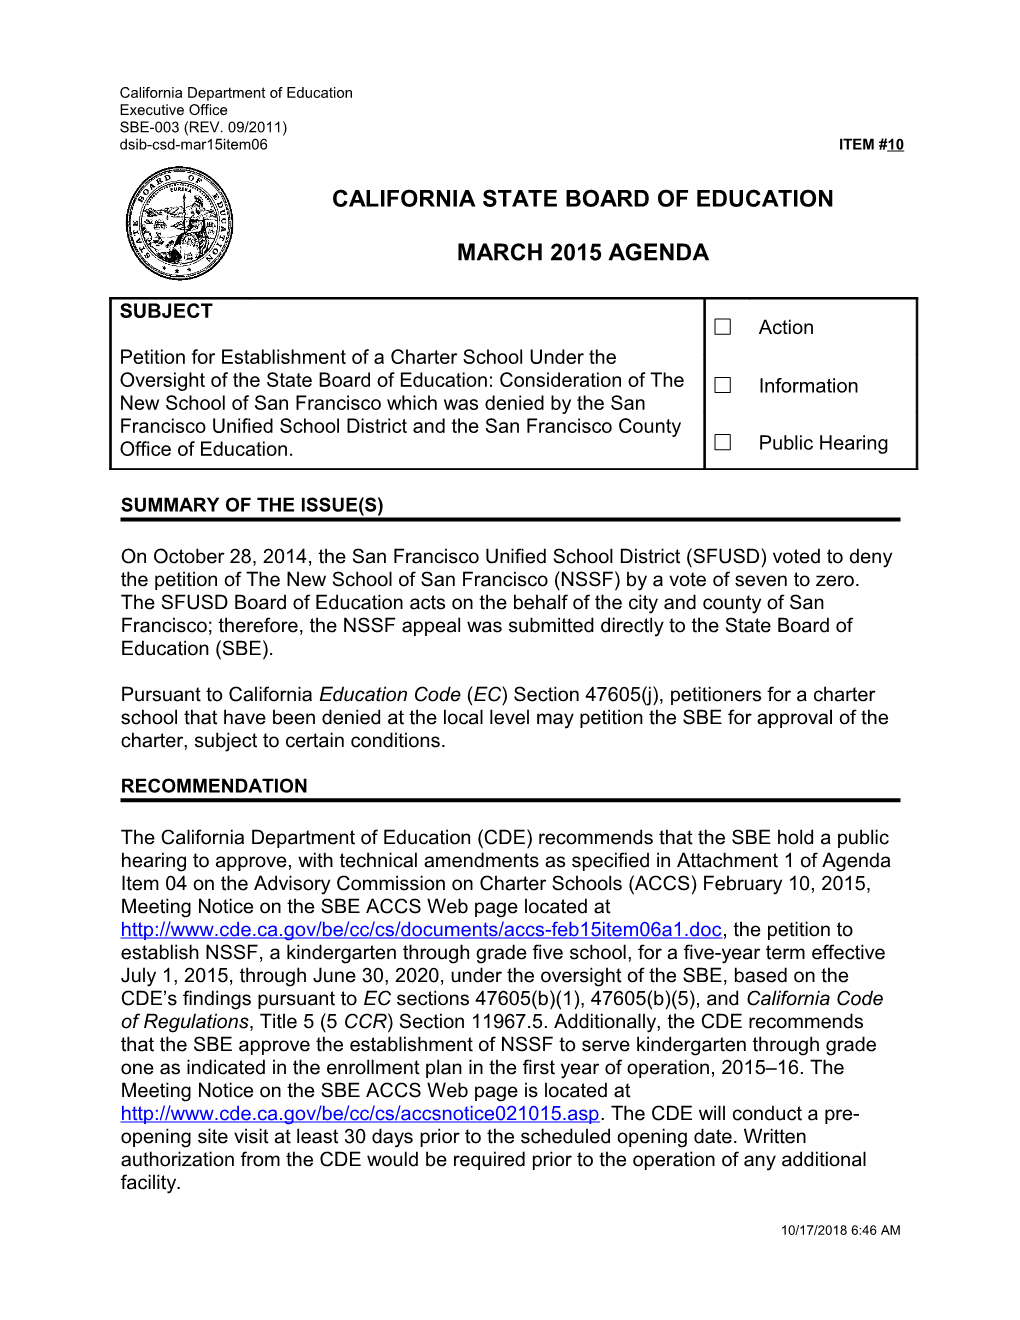 March 2015 Agenda Item 10 - Meeting Agendas (CA State Board of Education)